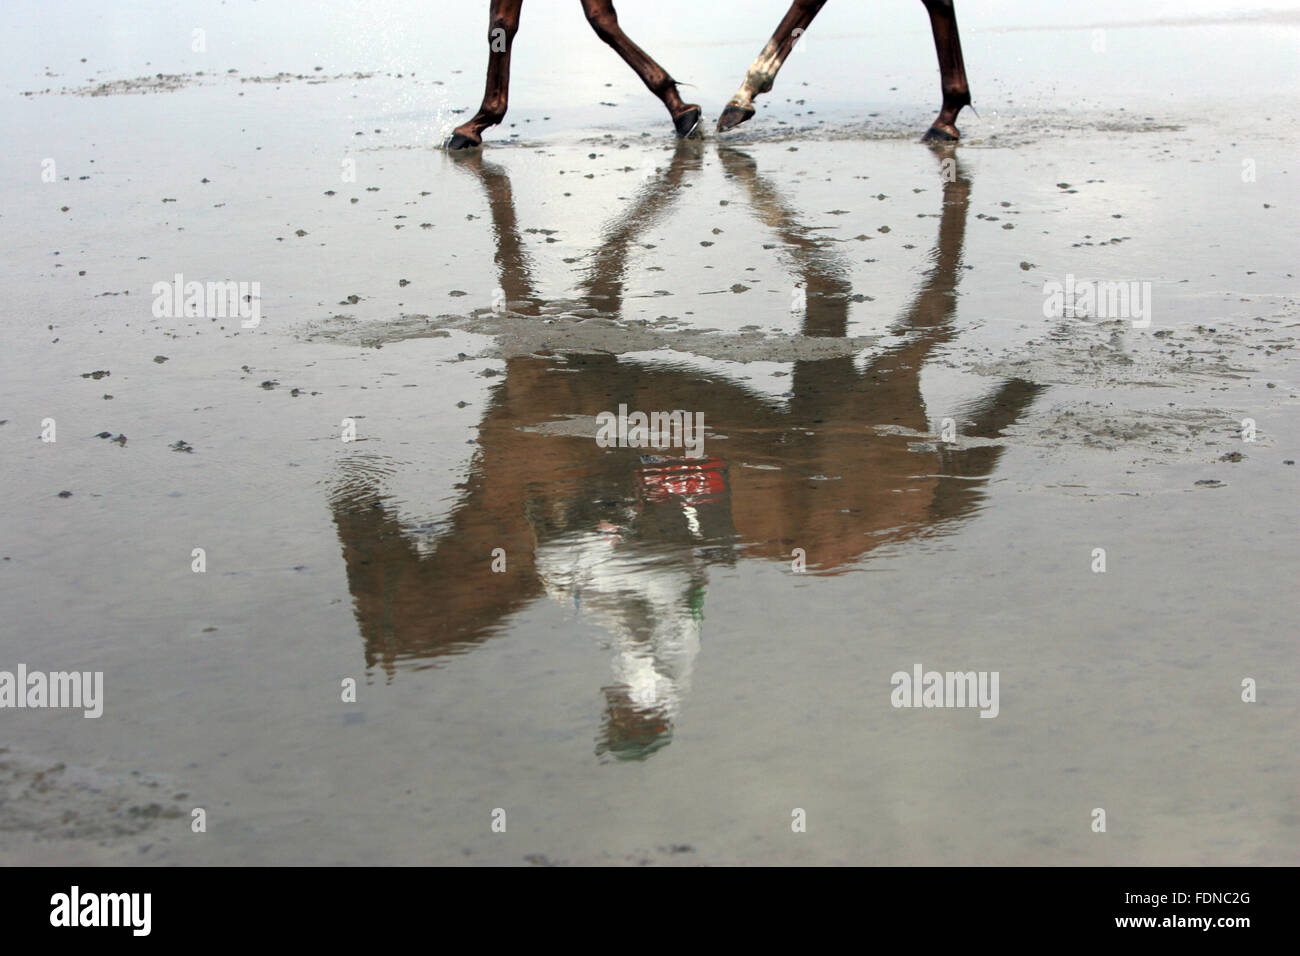 Cuxhaven, Germany, horse and jockey are reflected in Duhner Watt race in the water Stock Photo